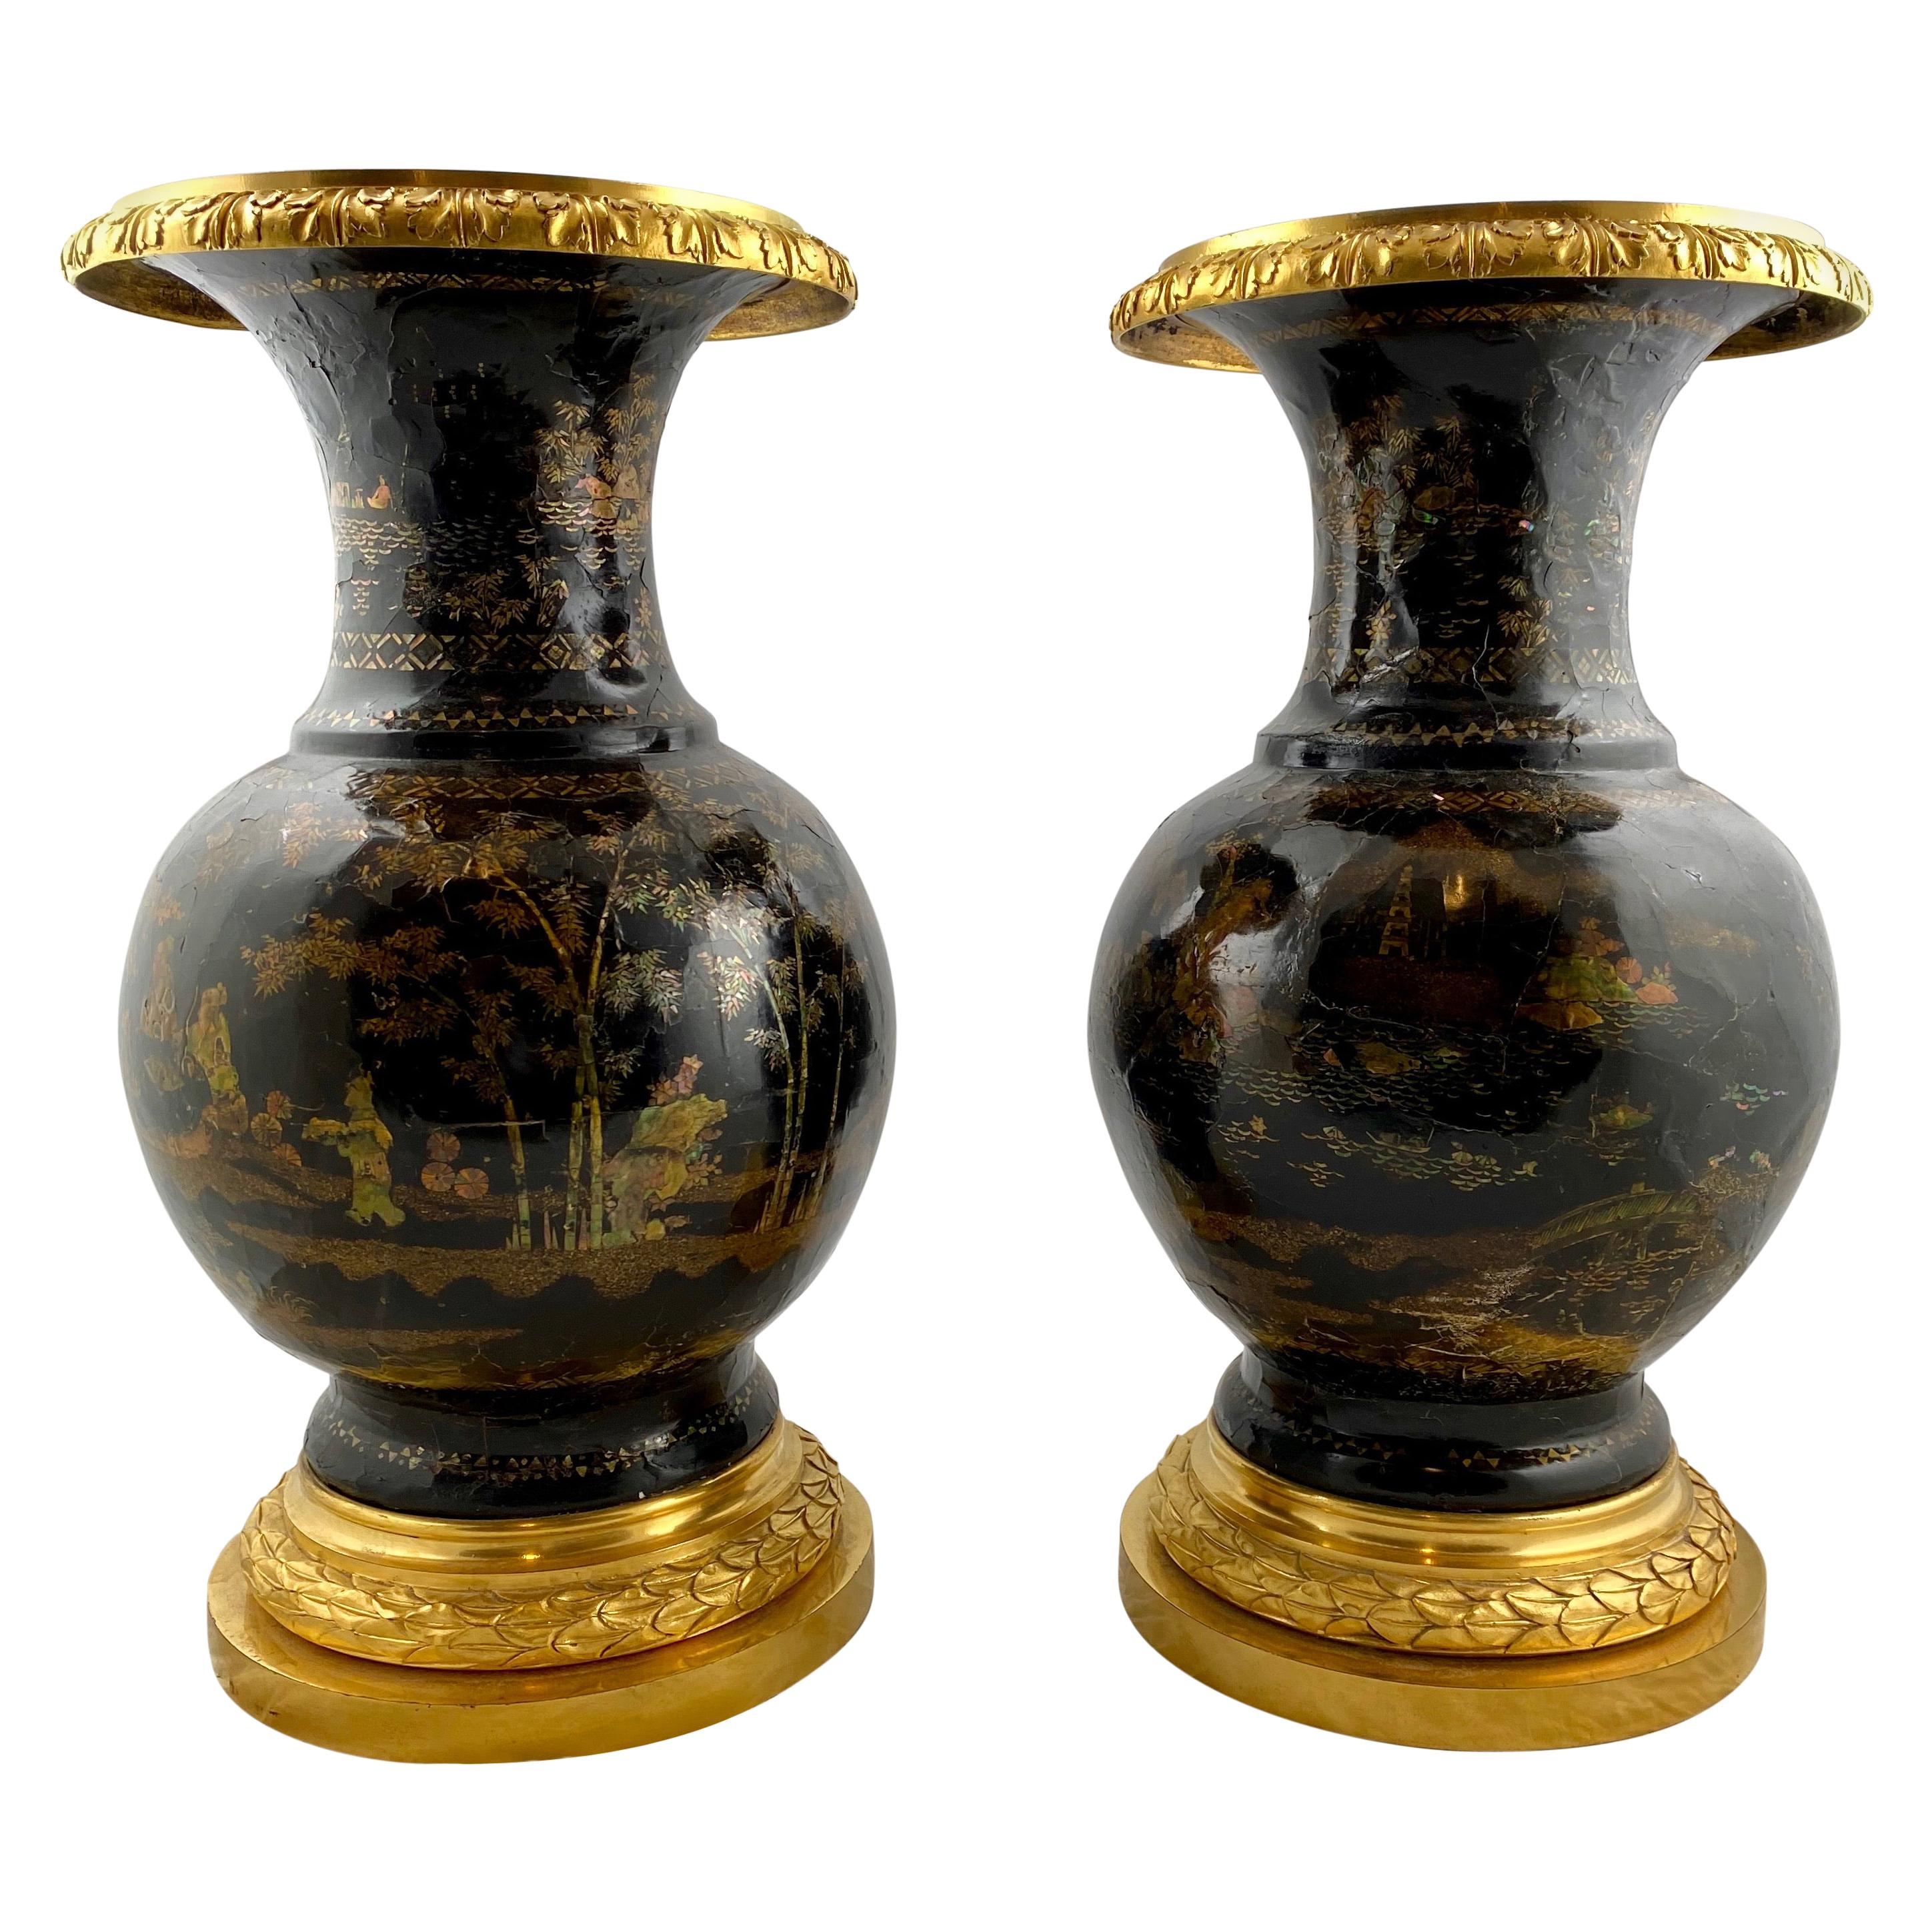 Pair of Chinese Lacquer Urns Mounted with Gilt Bronzes, 19th Century